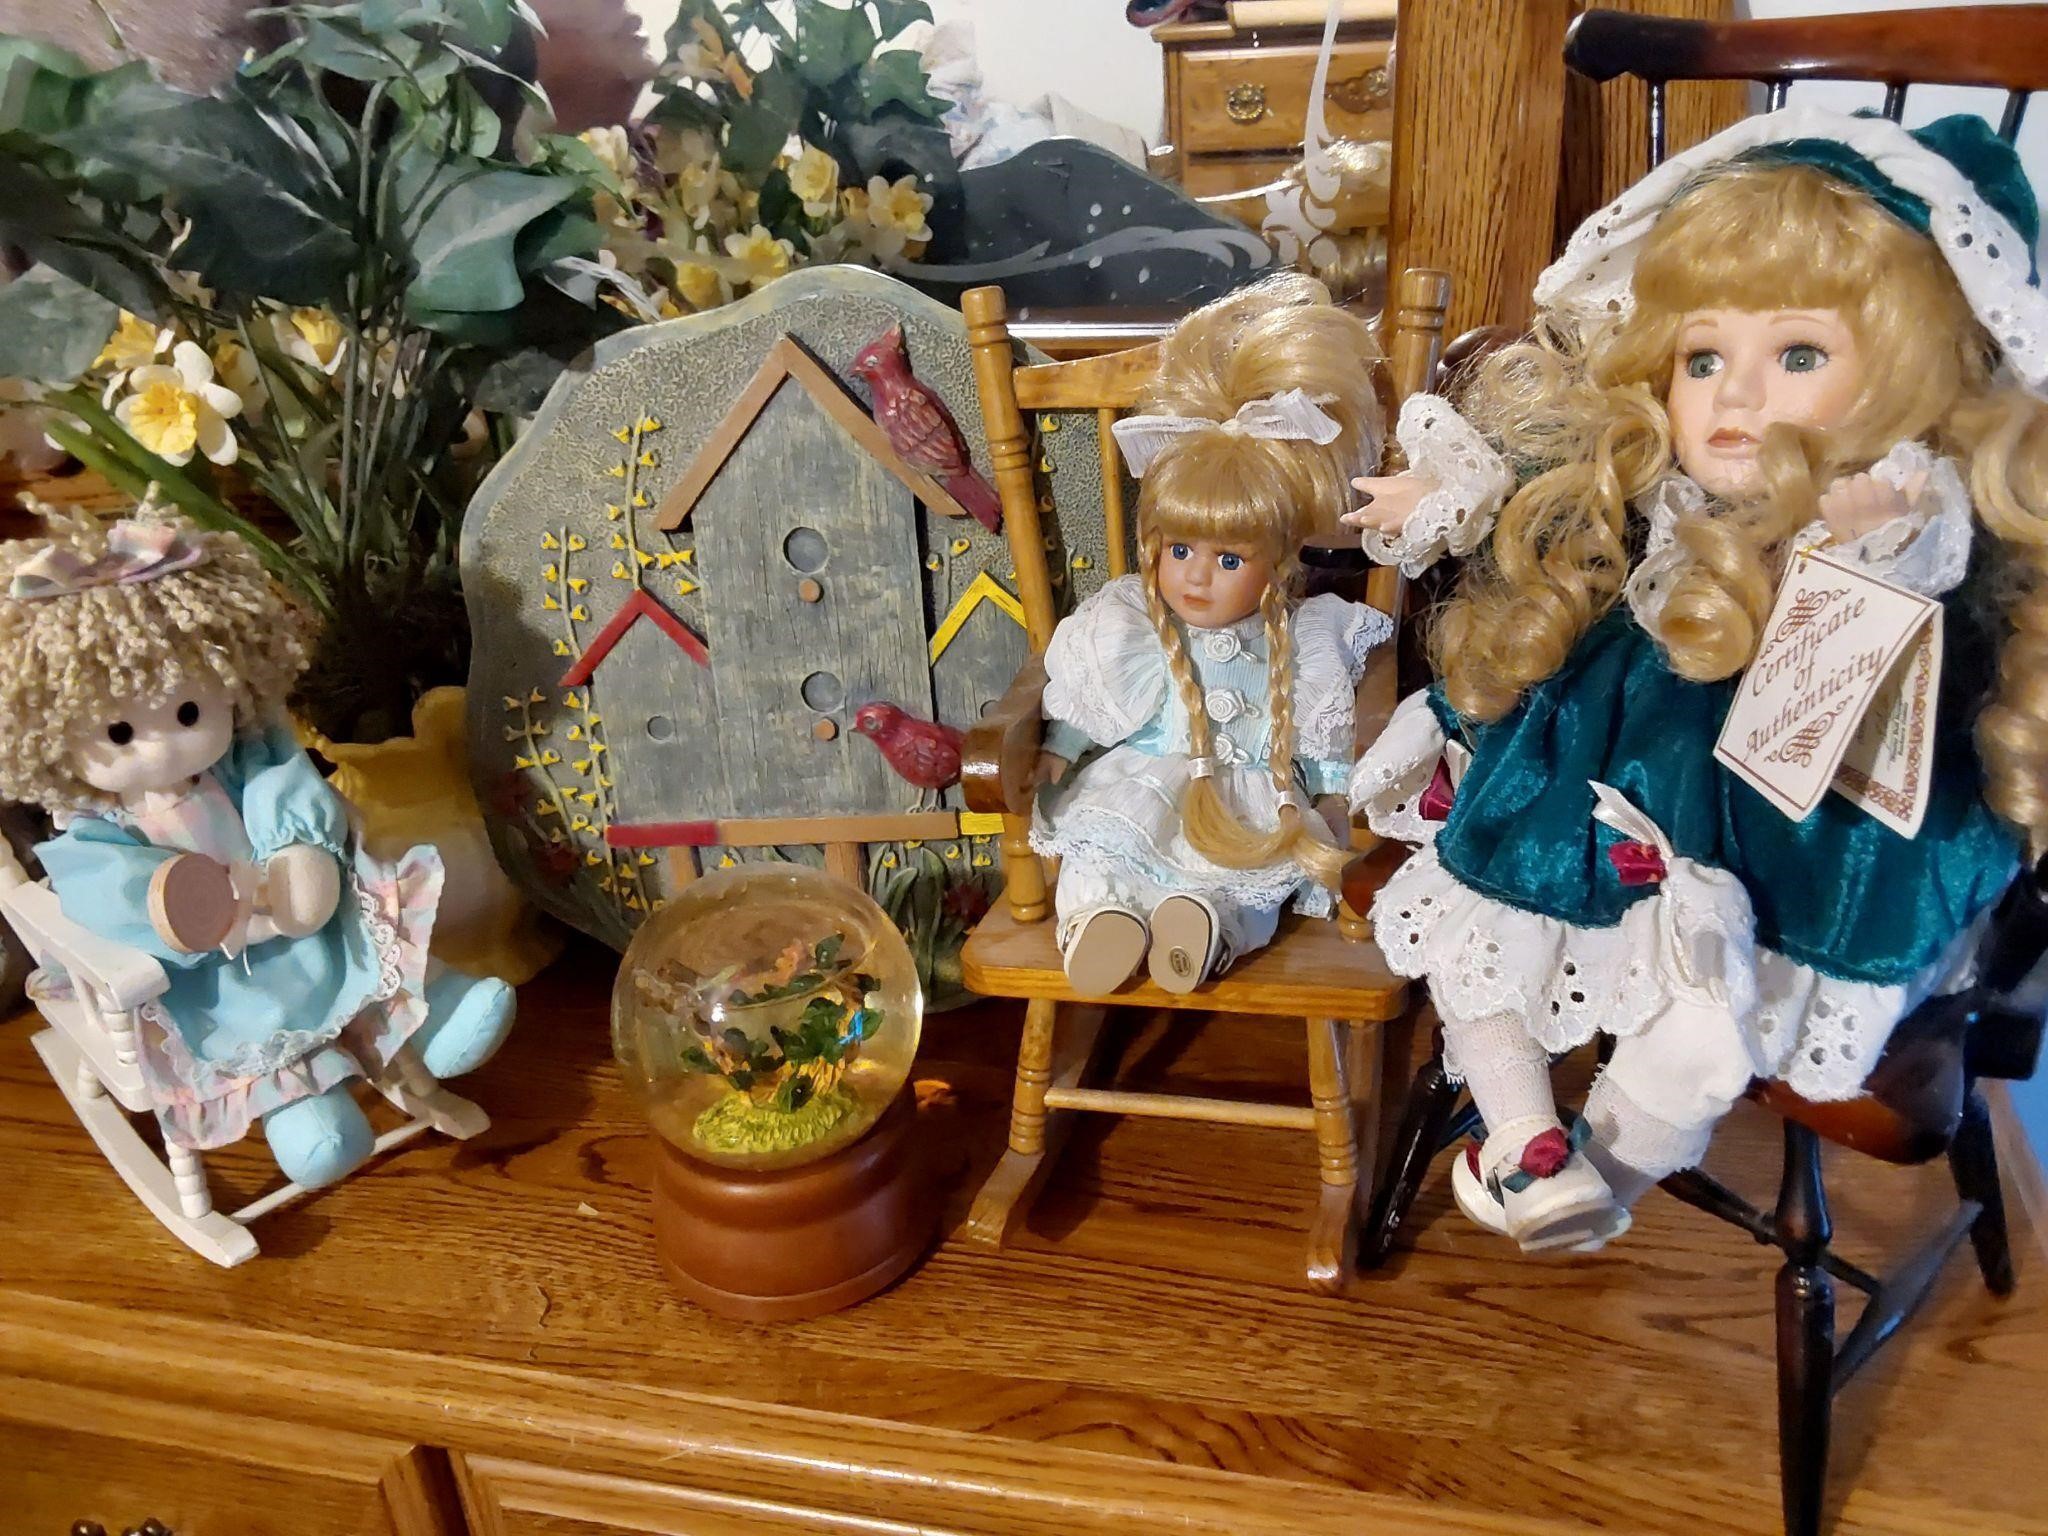 Dolls on Rocking Chairs & More